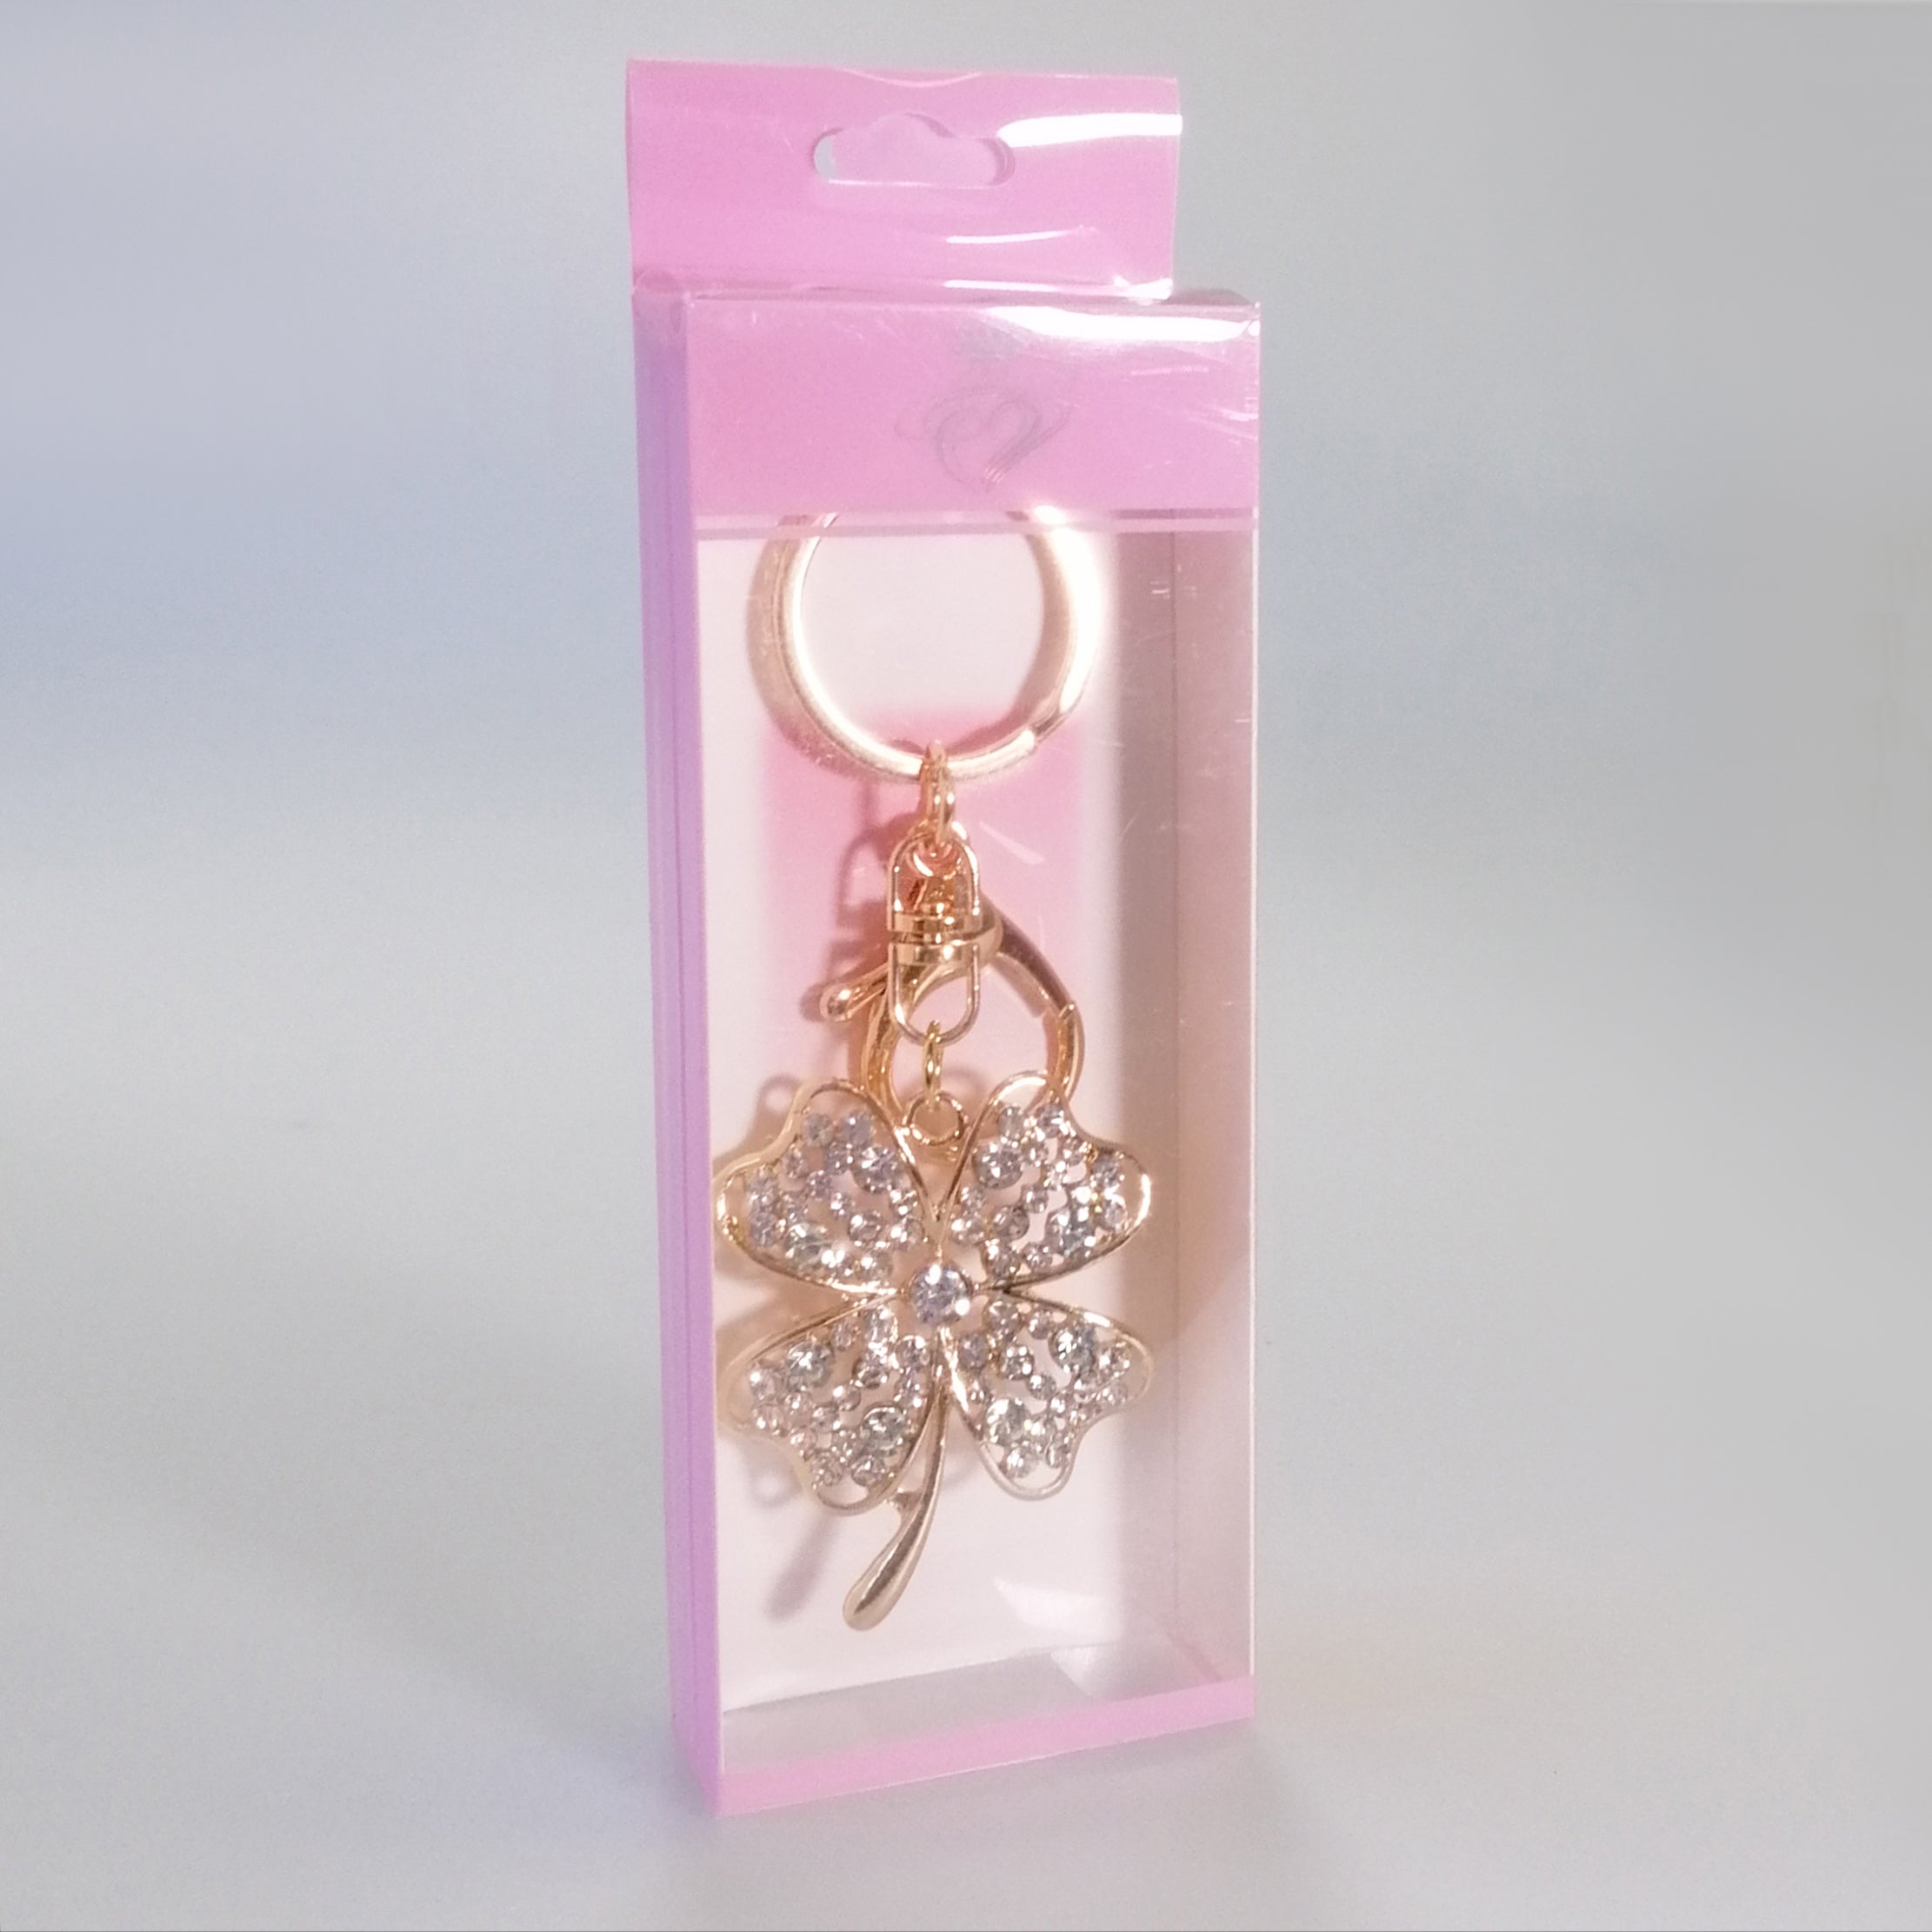 Bling Four-Leafed Clover Charm - Gold